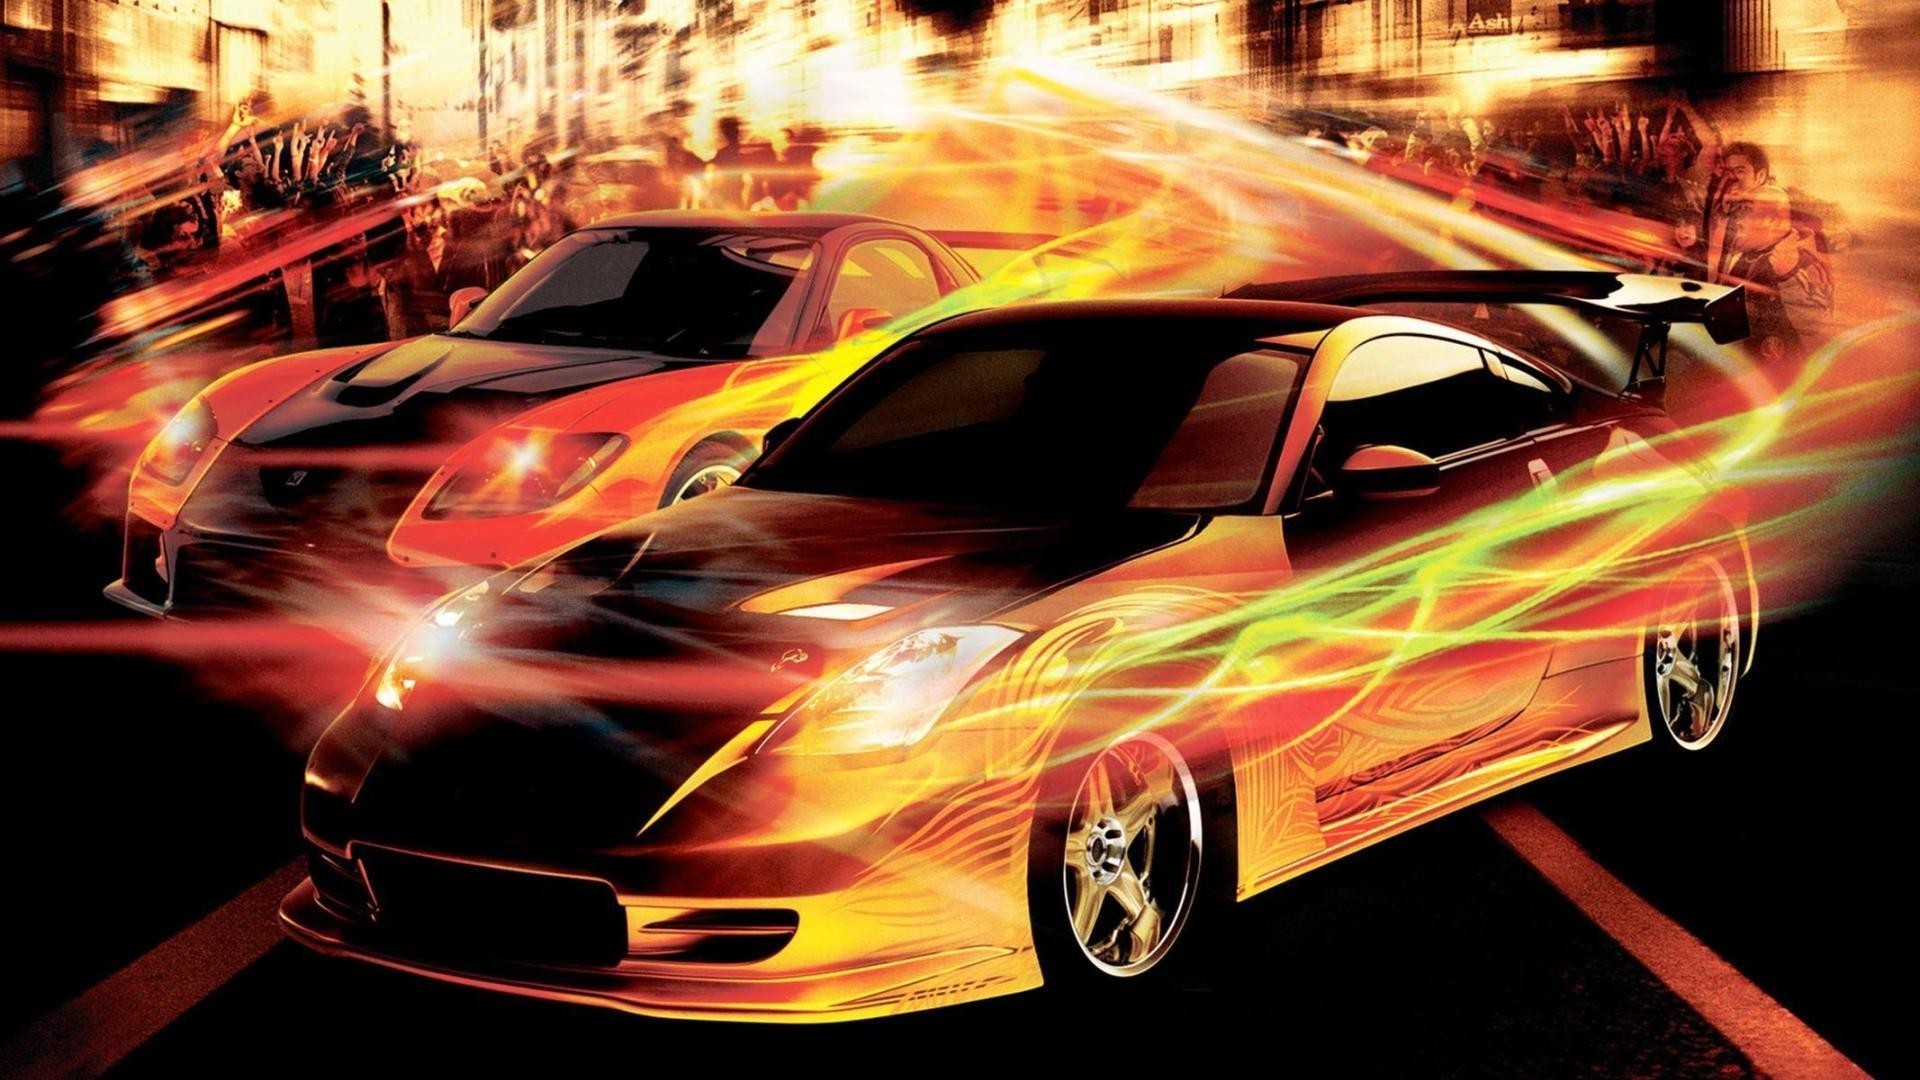 1920x1080 Movie - The Fast And The Furious: Tokyo Drift Fast & Furious Wallpaper